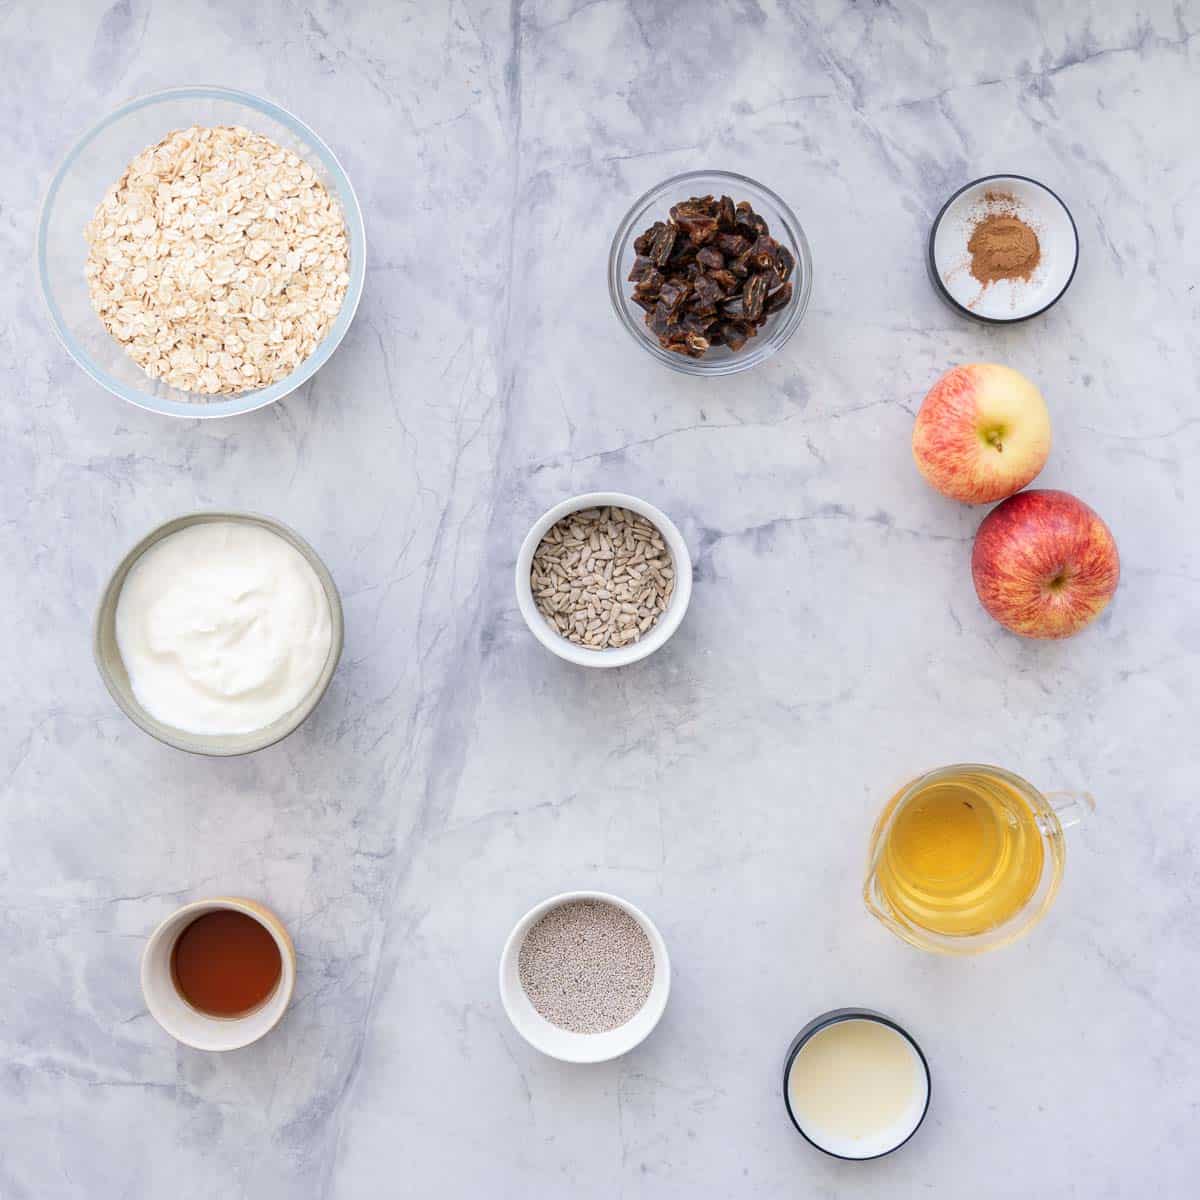 All the ingredients to make the Bircher Muesli all laid out on the bench